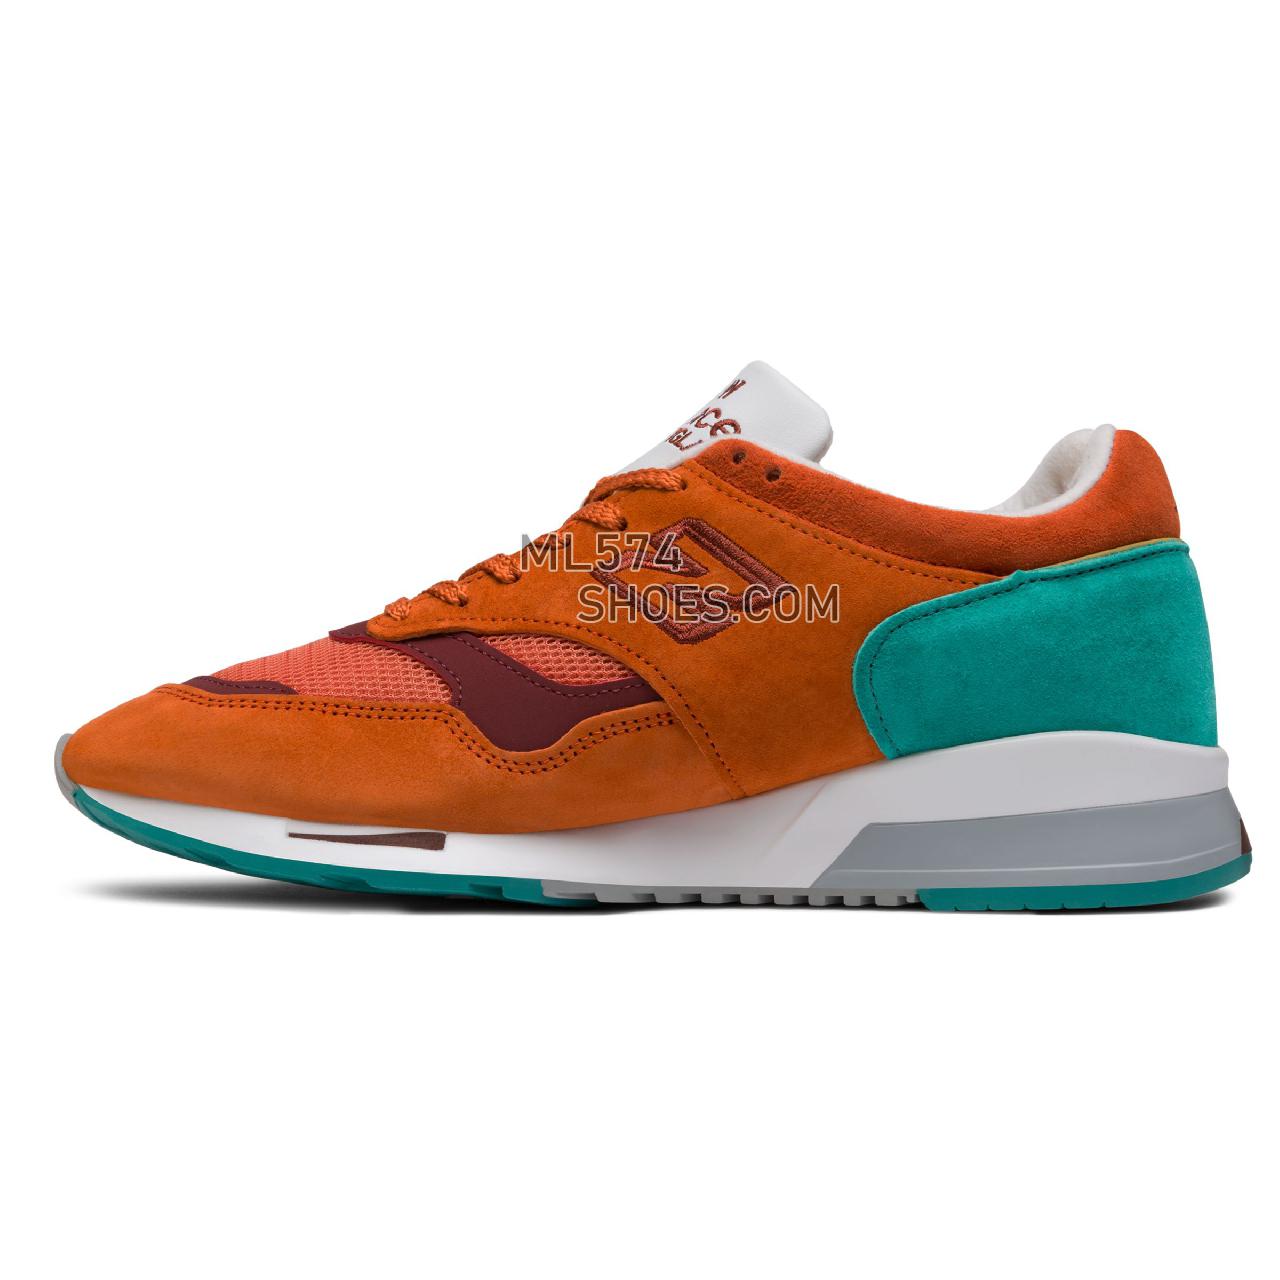 New Balance 1500 Made in UK - Men's 1500 - Classic Orange Popsicle with Porcelain Green - M1500SU